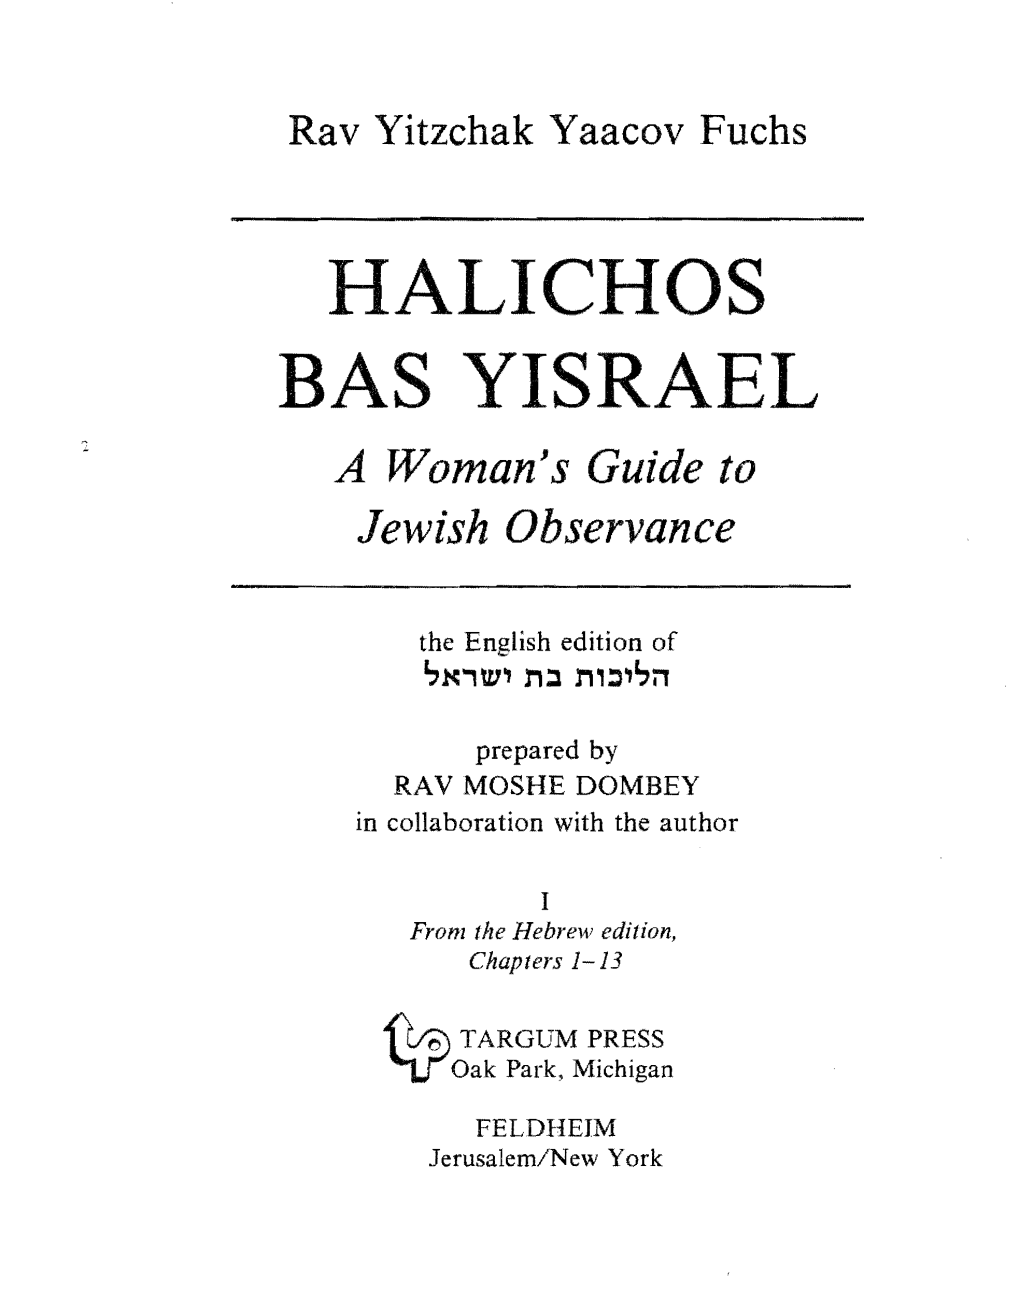 HALICHOS BAS YISRAEL a Woman's Guide to Jewish Observance